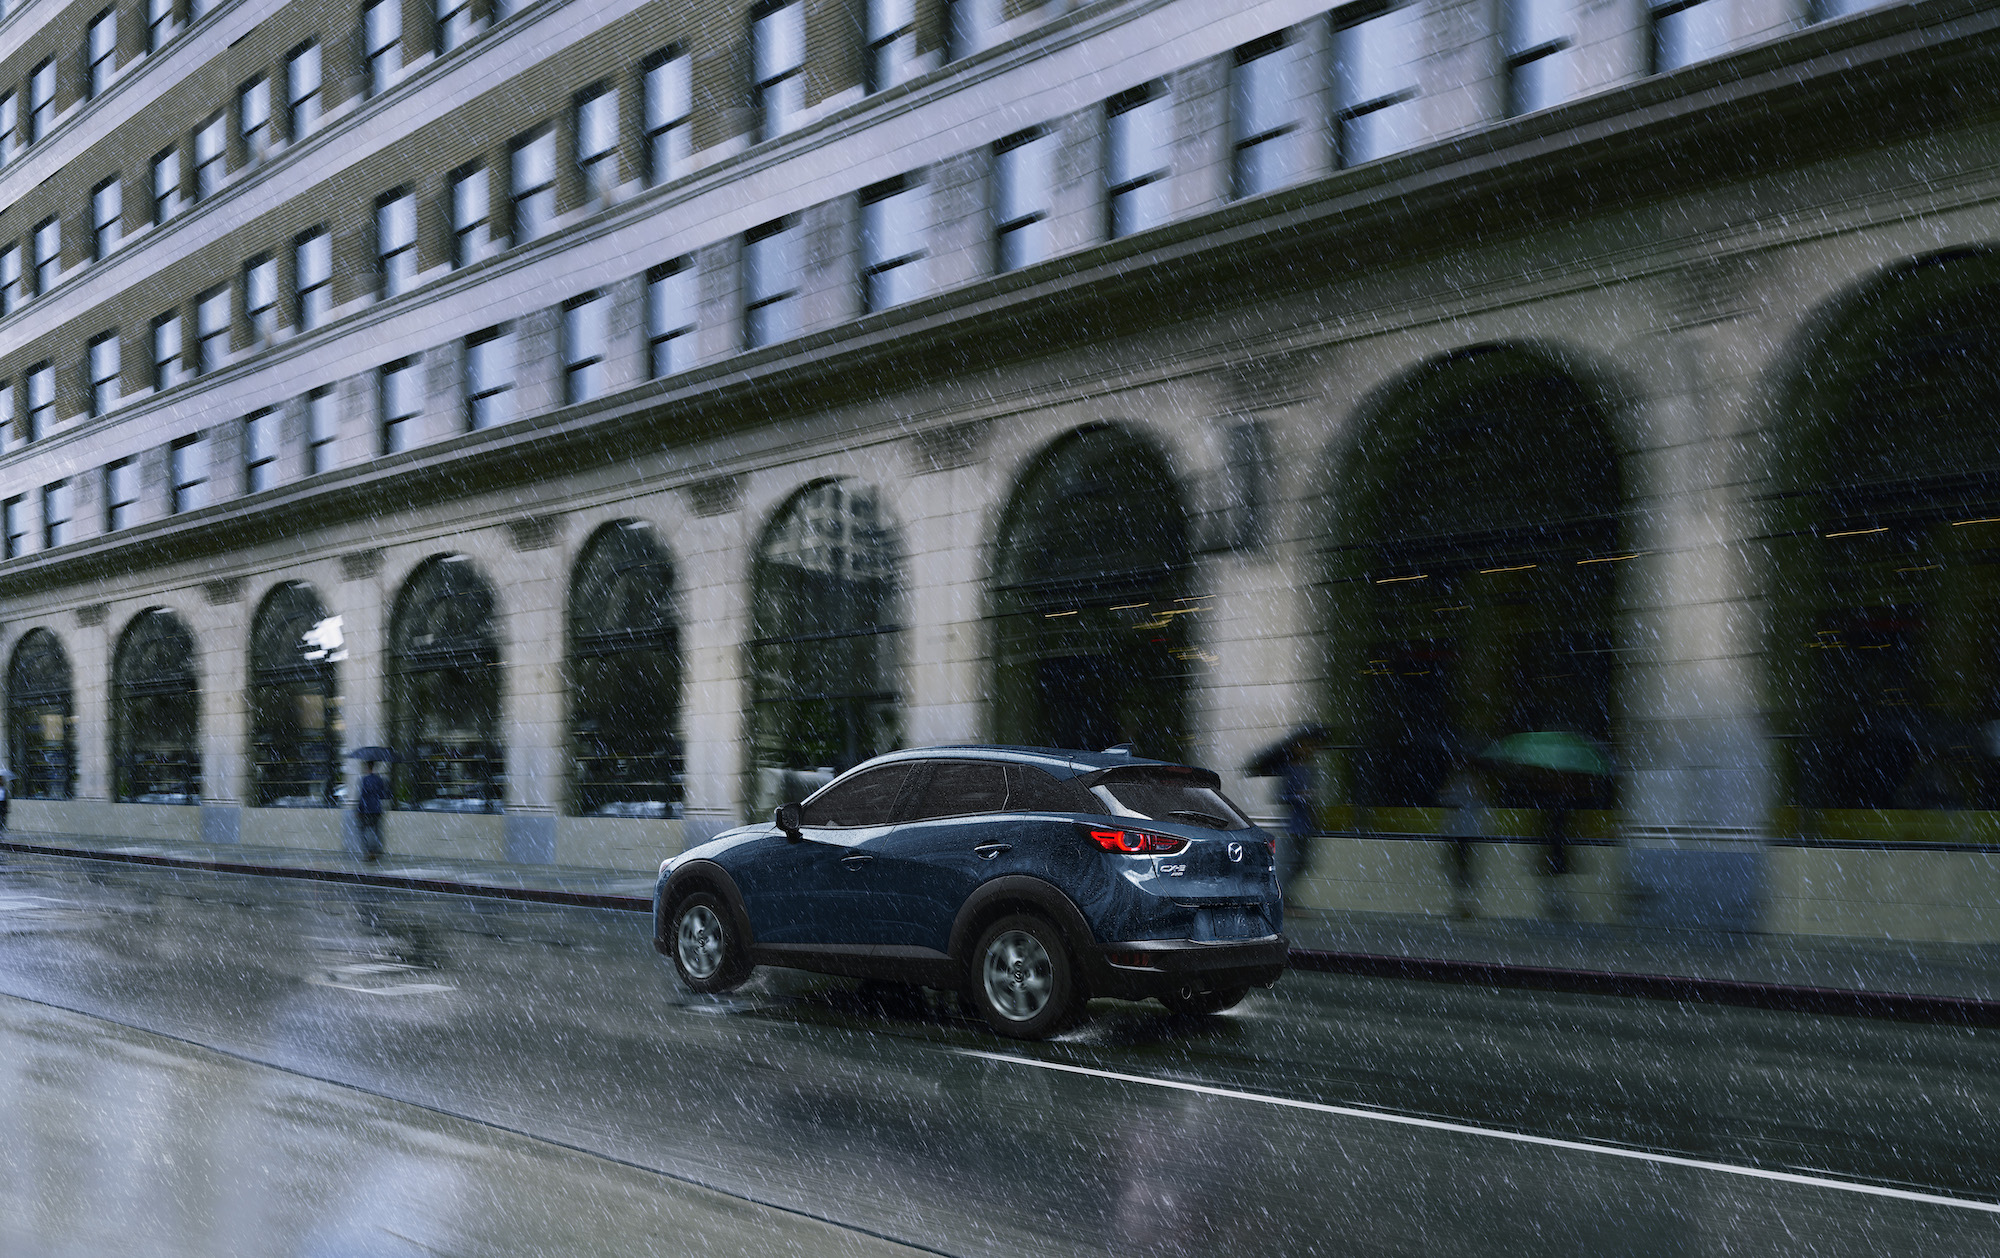 A blue 2021 Mazda CX-3 Sport subcompact SUV drives on a city street in the rain